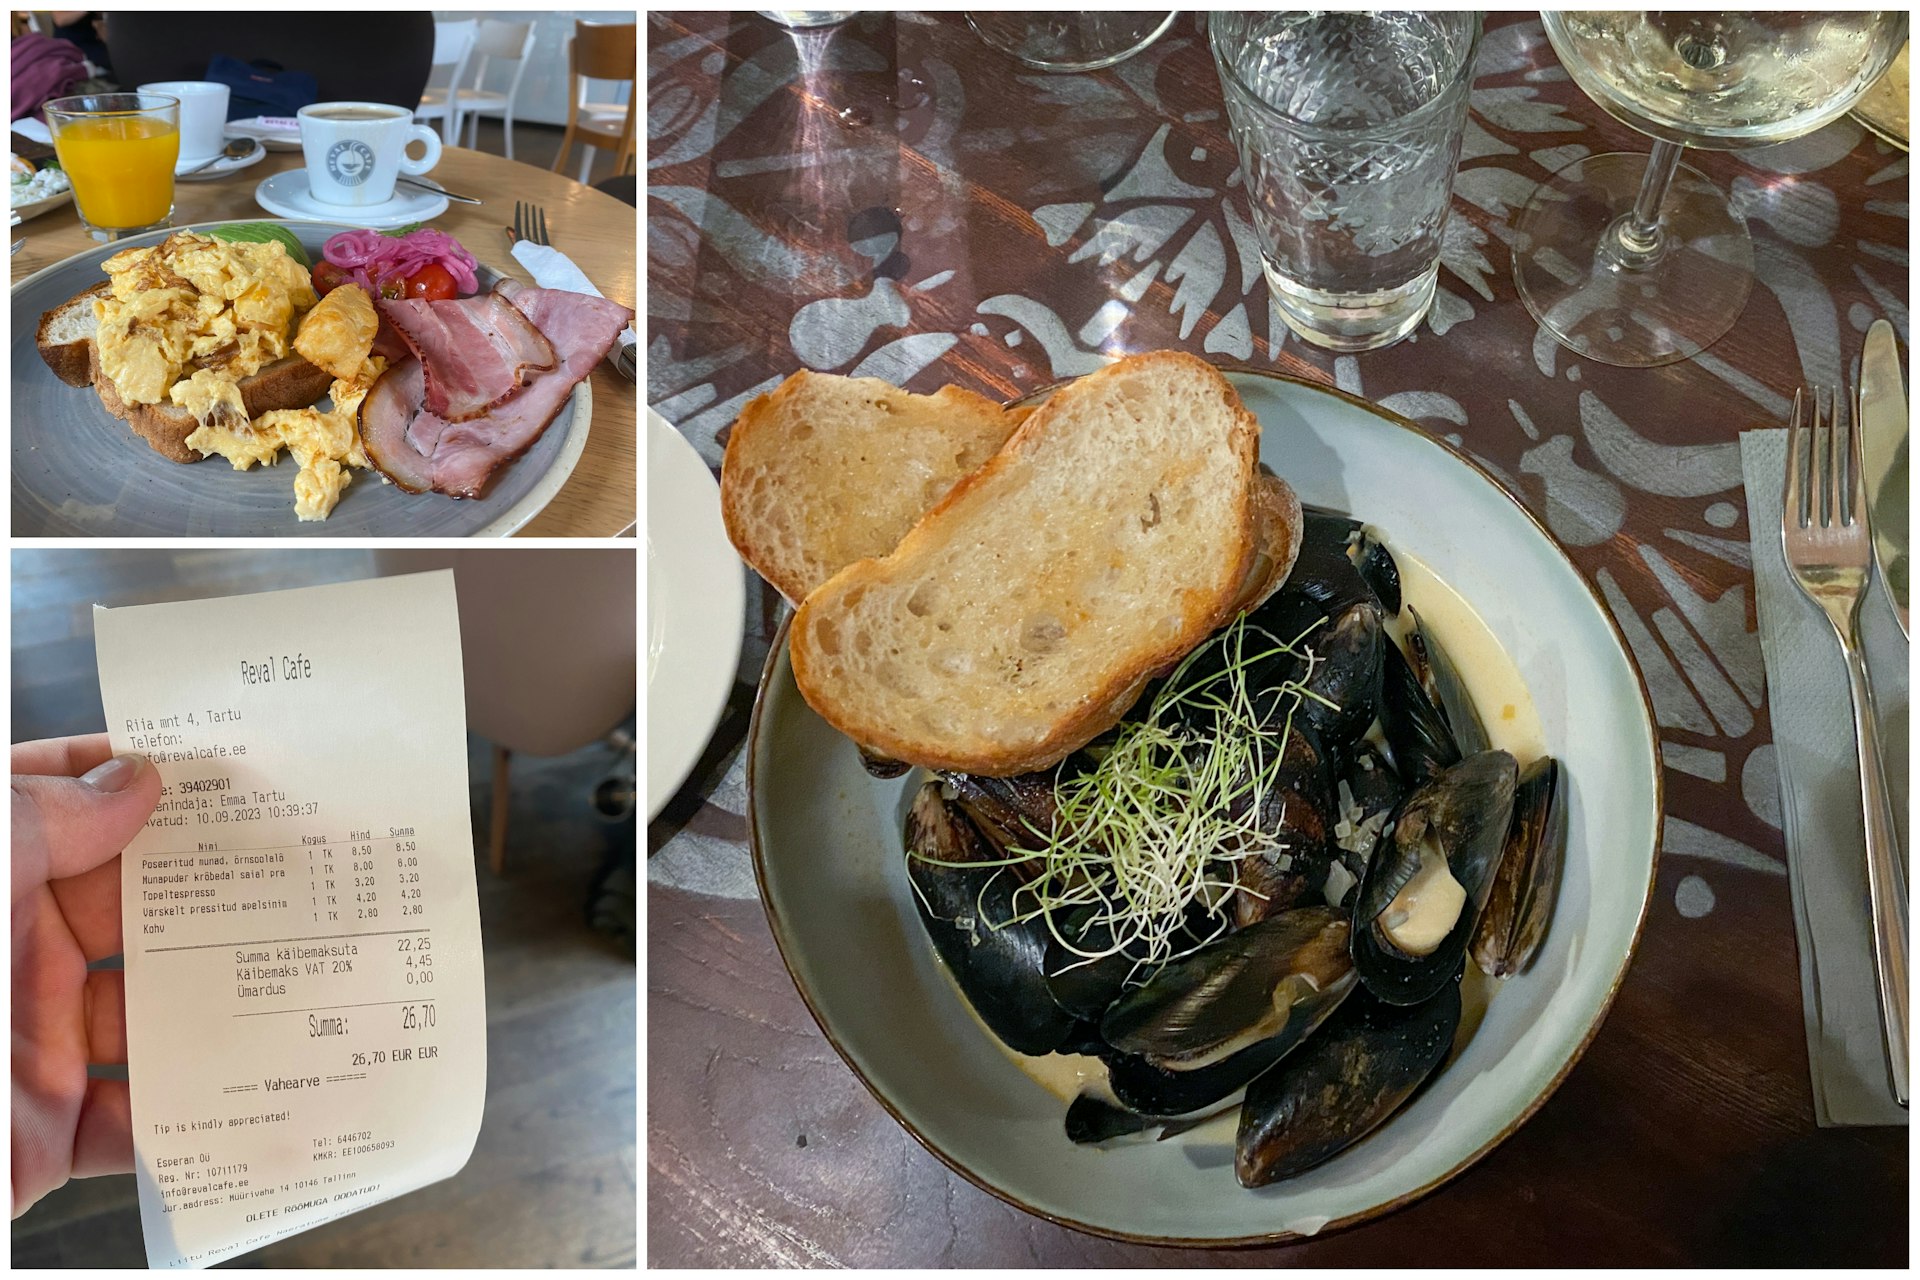 Food in Tartu: a breakfast of eggs and bacon and a dinner of blue mussels in white wine sauce